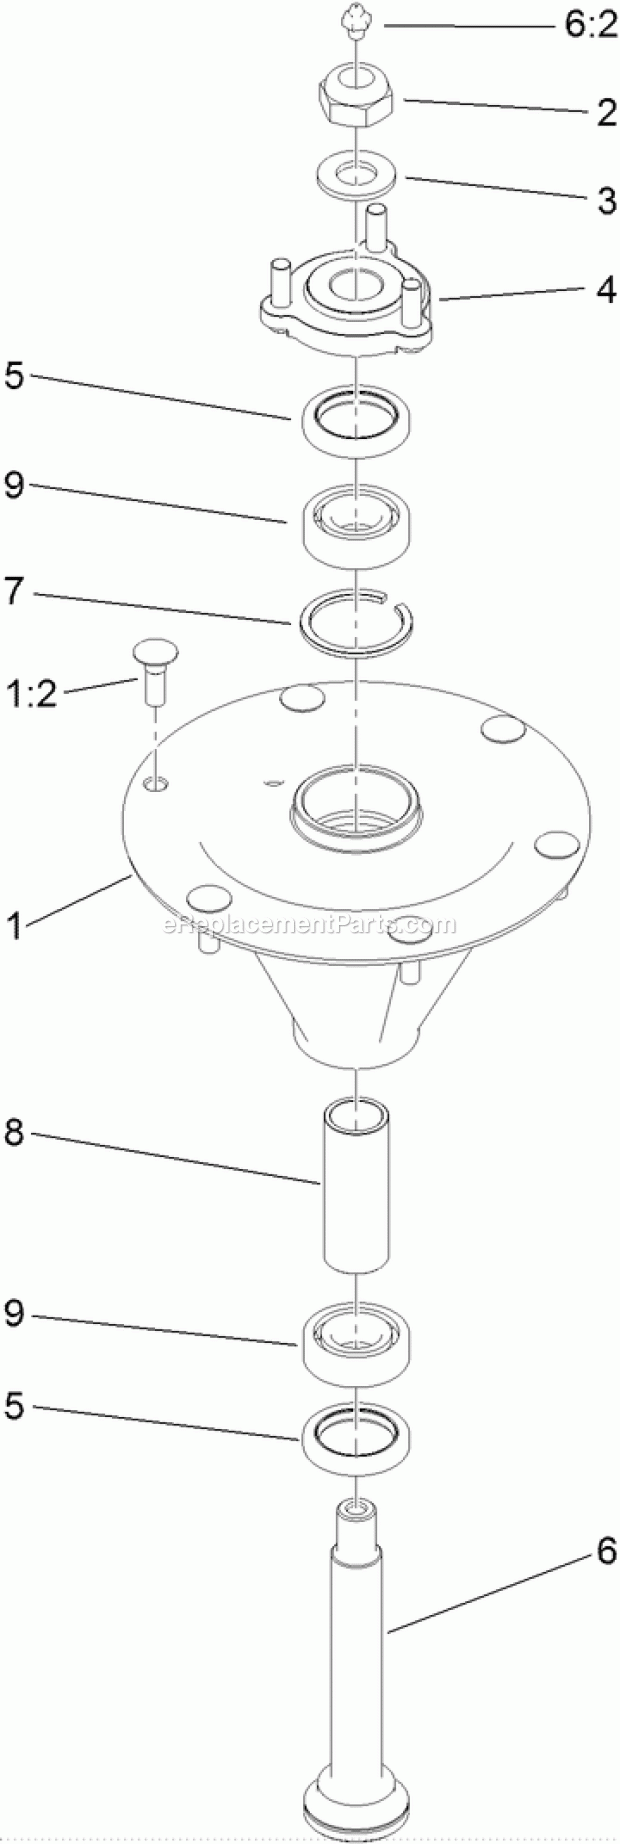 Toro 74923 (313000001-313999999) Z Master Professional 6000 Series Riding Mower, With 52in Turbo Force Side Discharge Mower, 201 Spindle Assembly No. 119-8560 Diagram